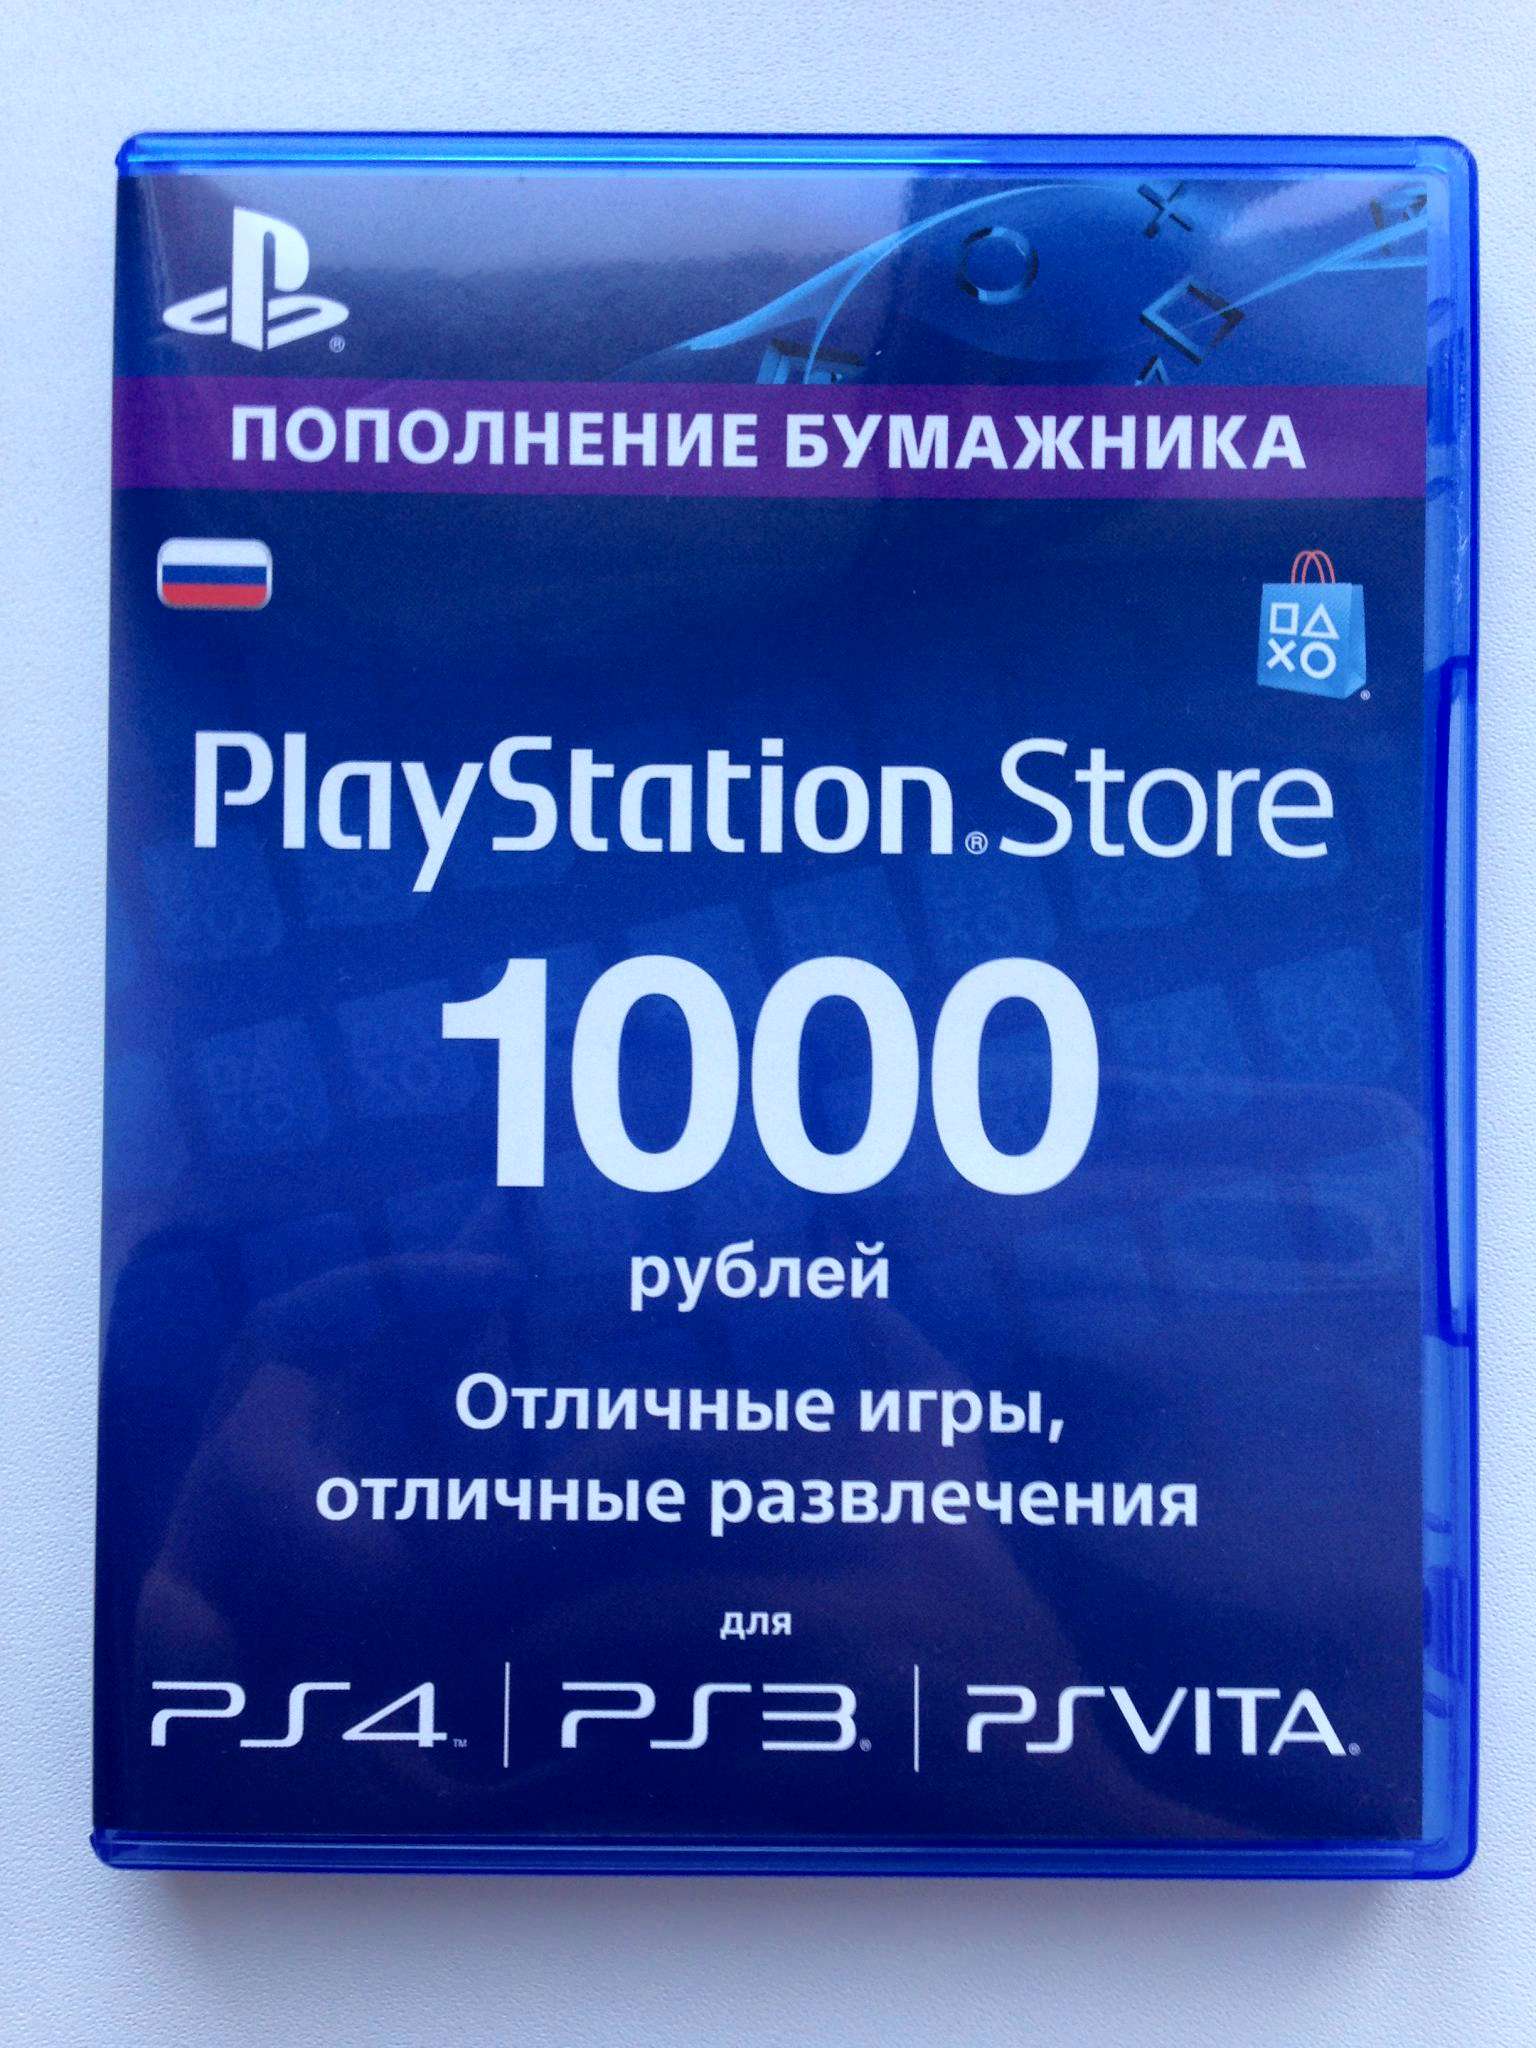 PSN 1000 rubles Playstation Network payment card